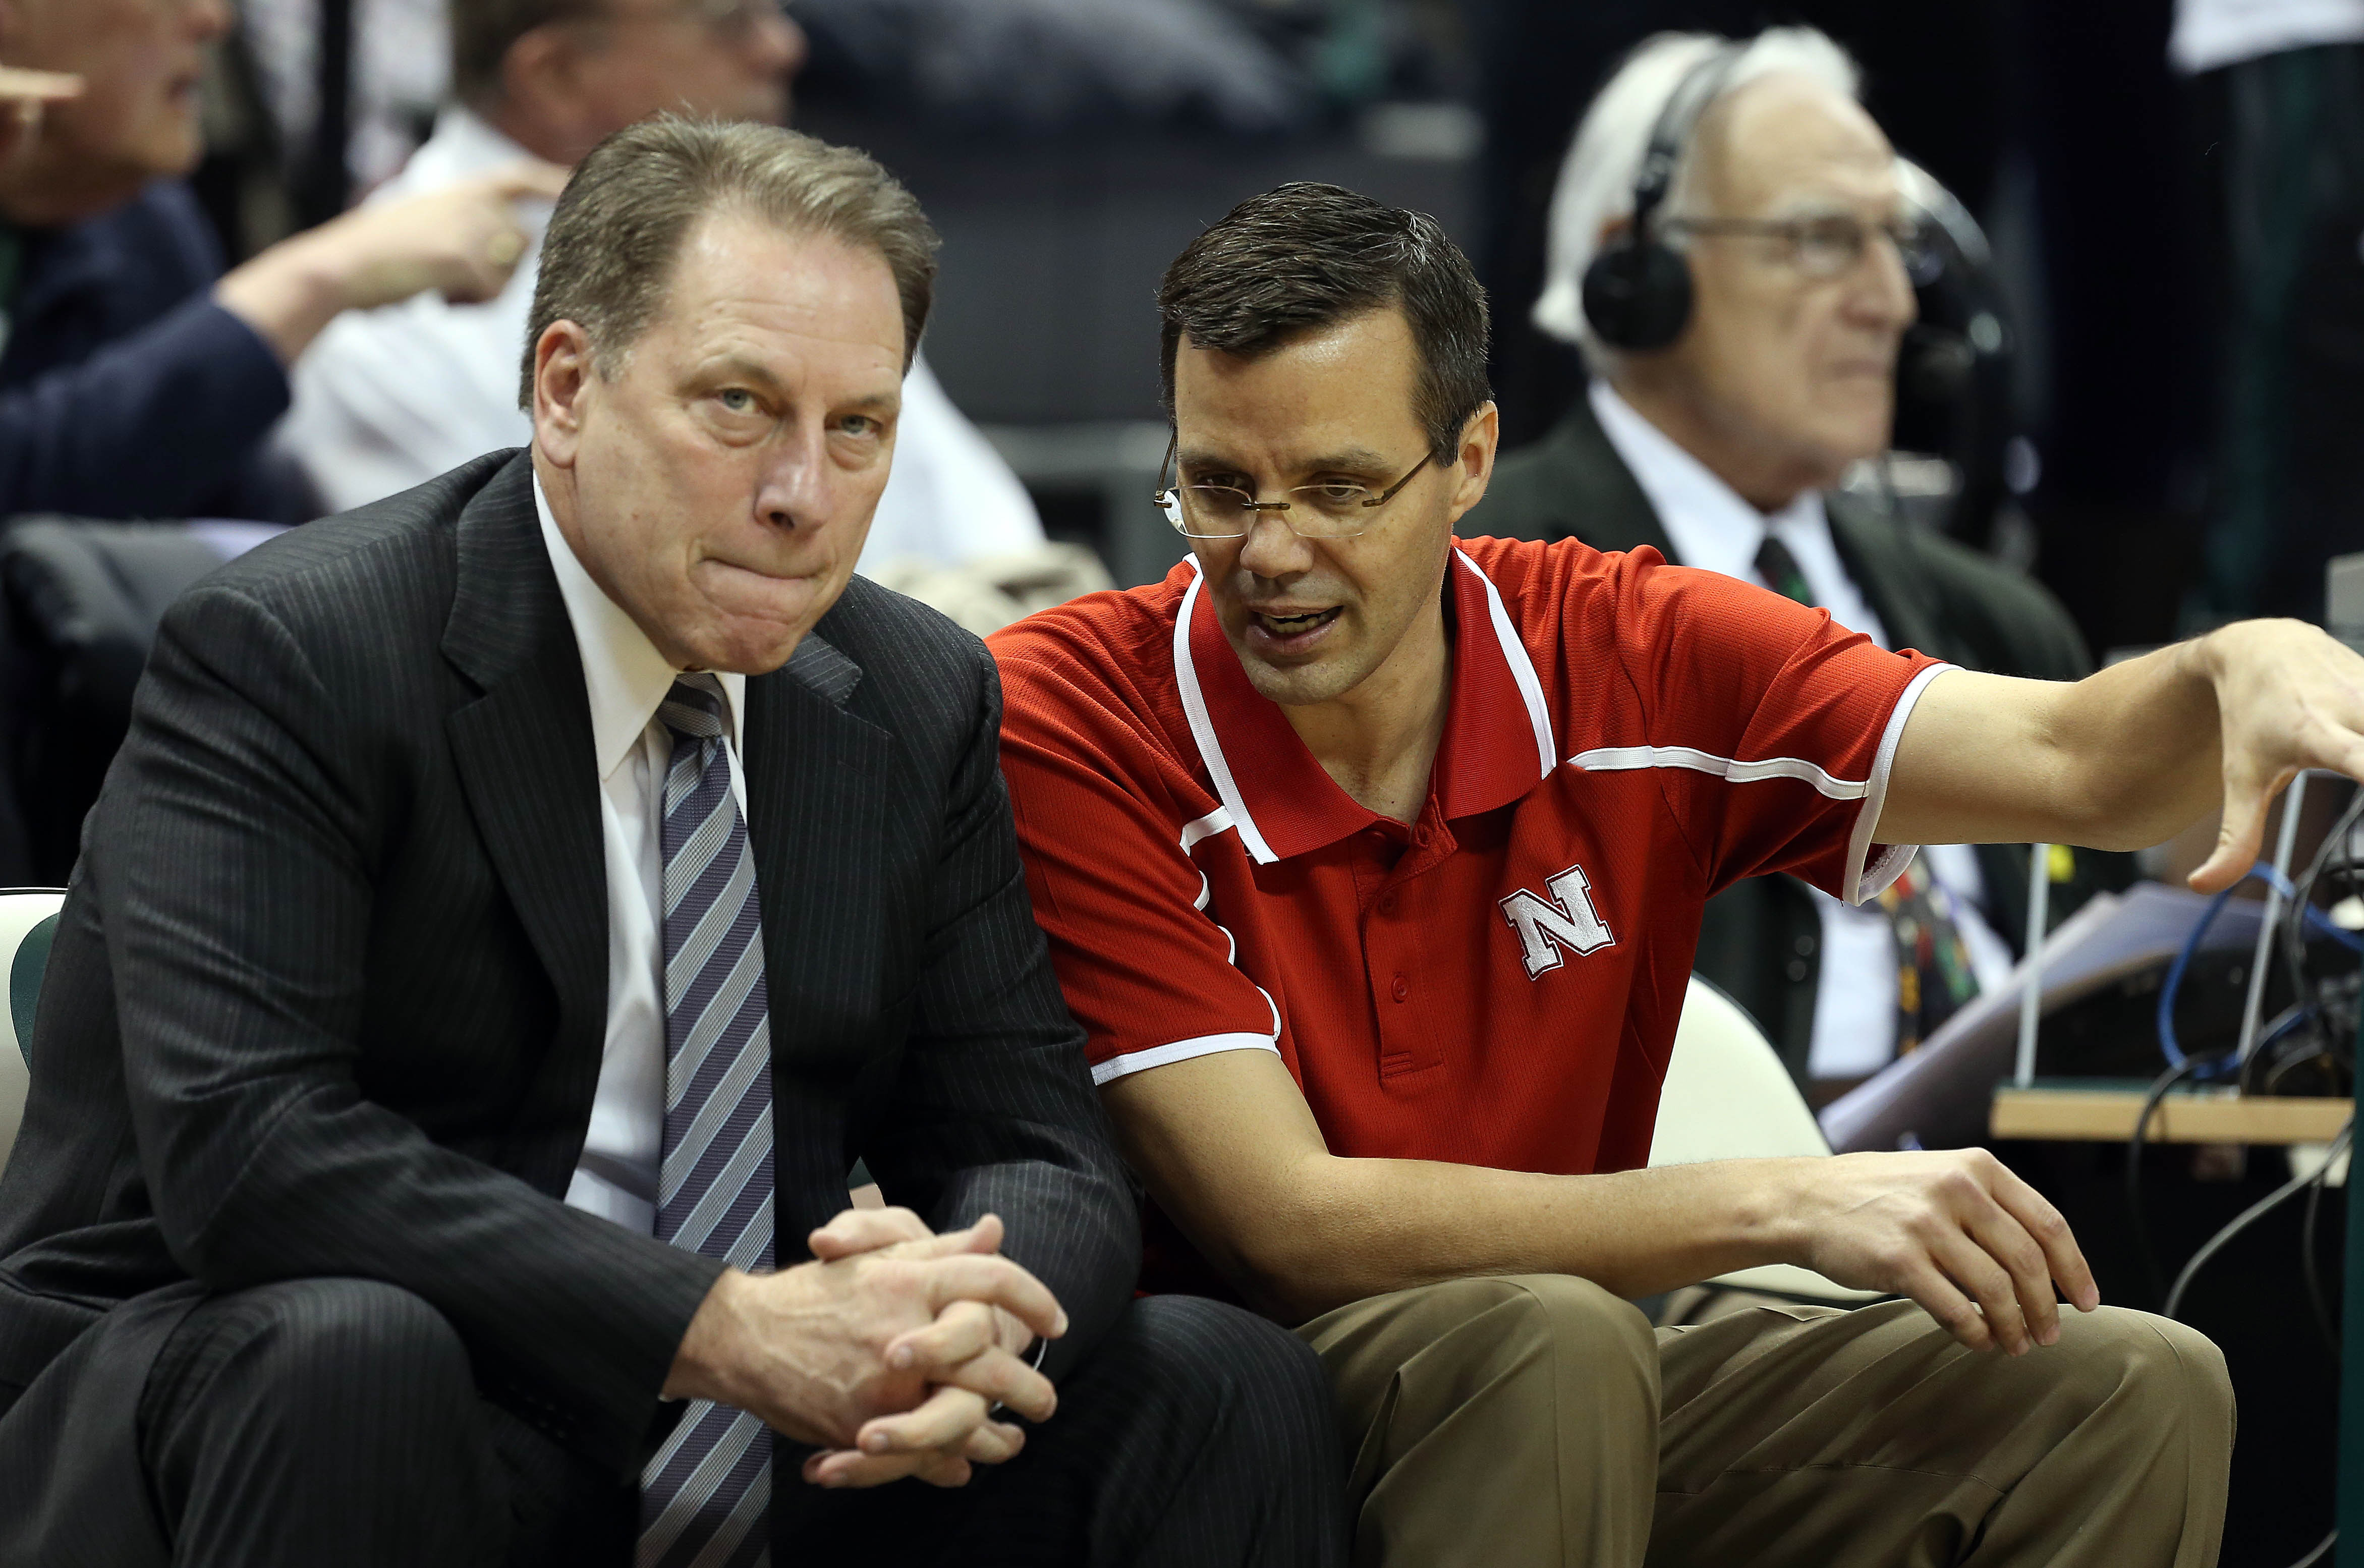 Poll Who is your leader for Big Ten Coach of the Year? Big Ten Network